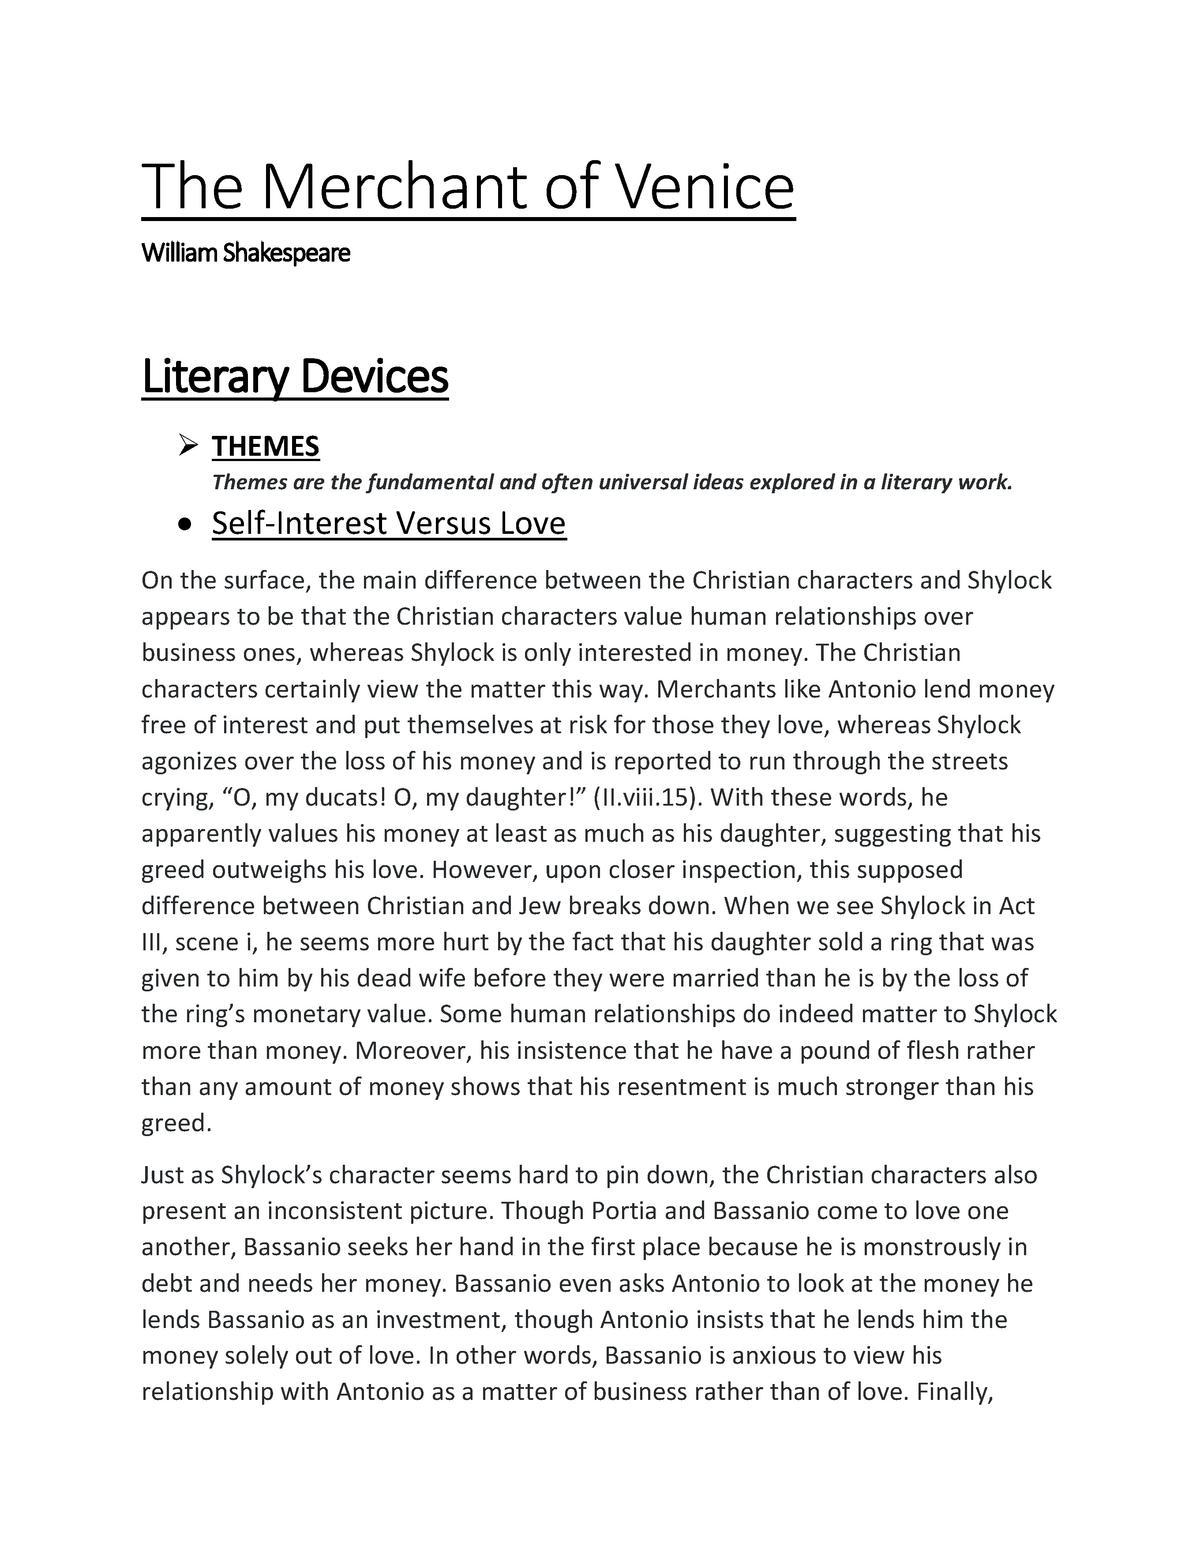 Merchant of Venice Class 10th English - Question Answers and Summary